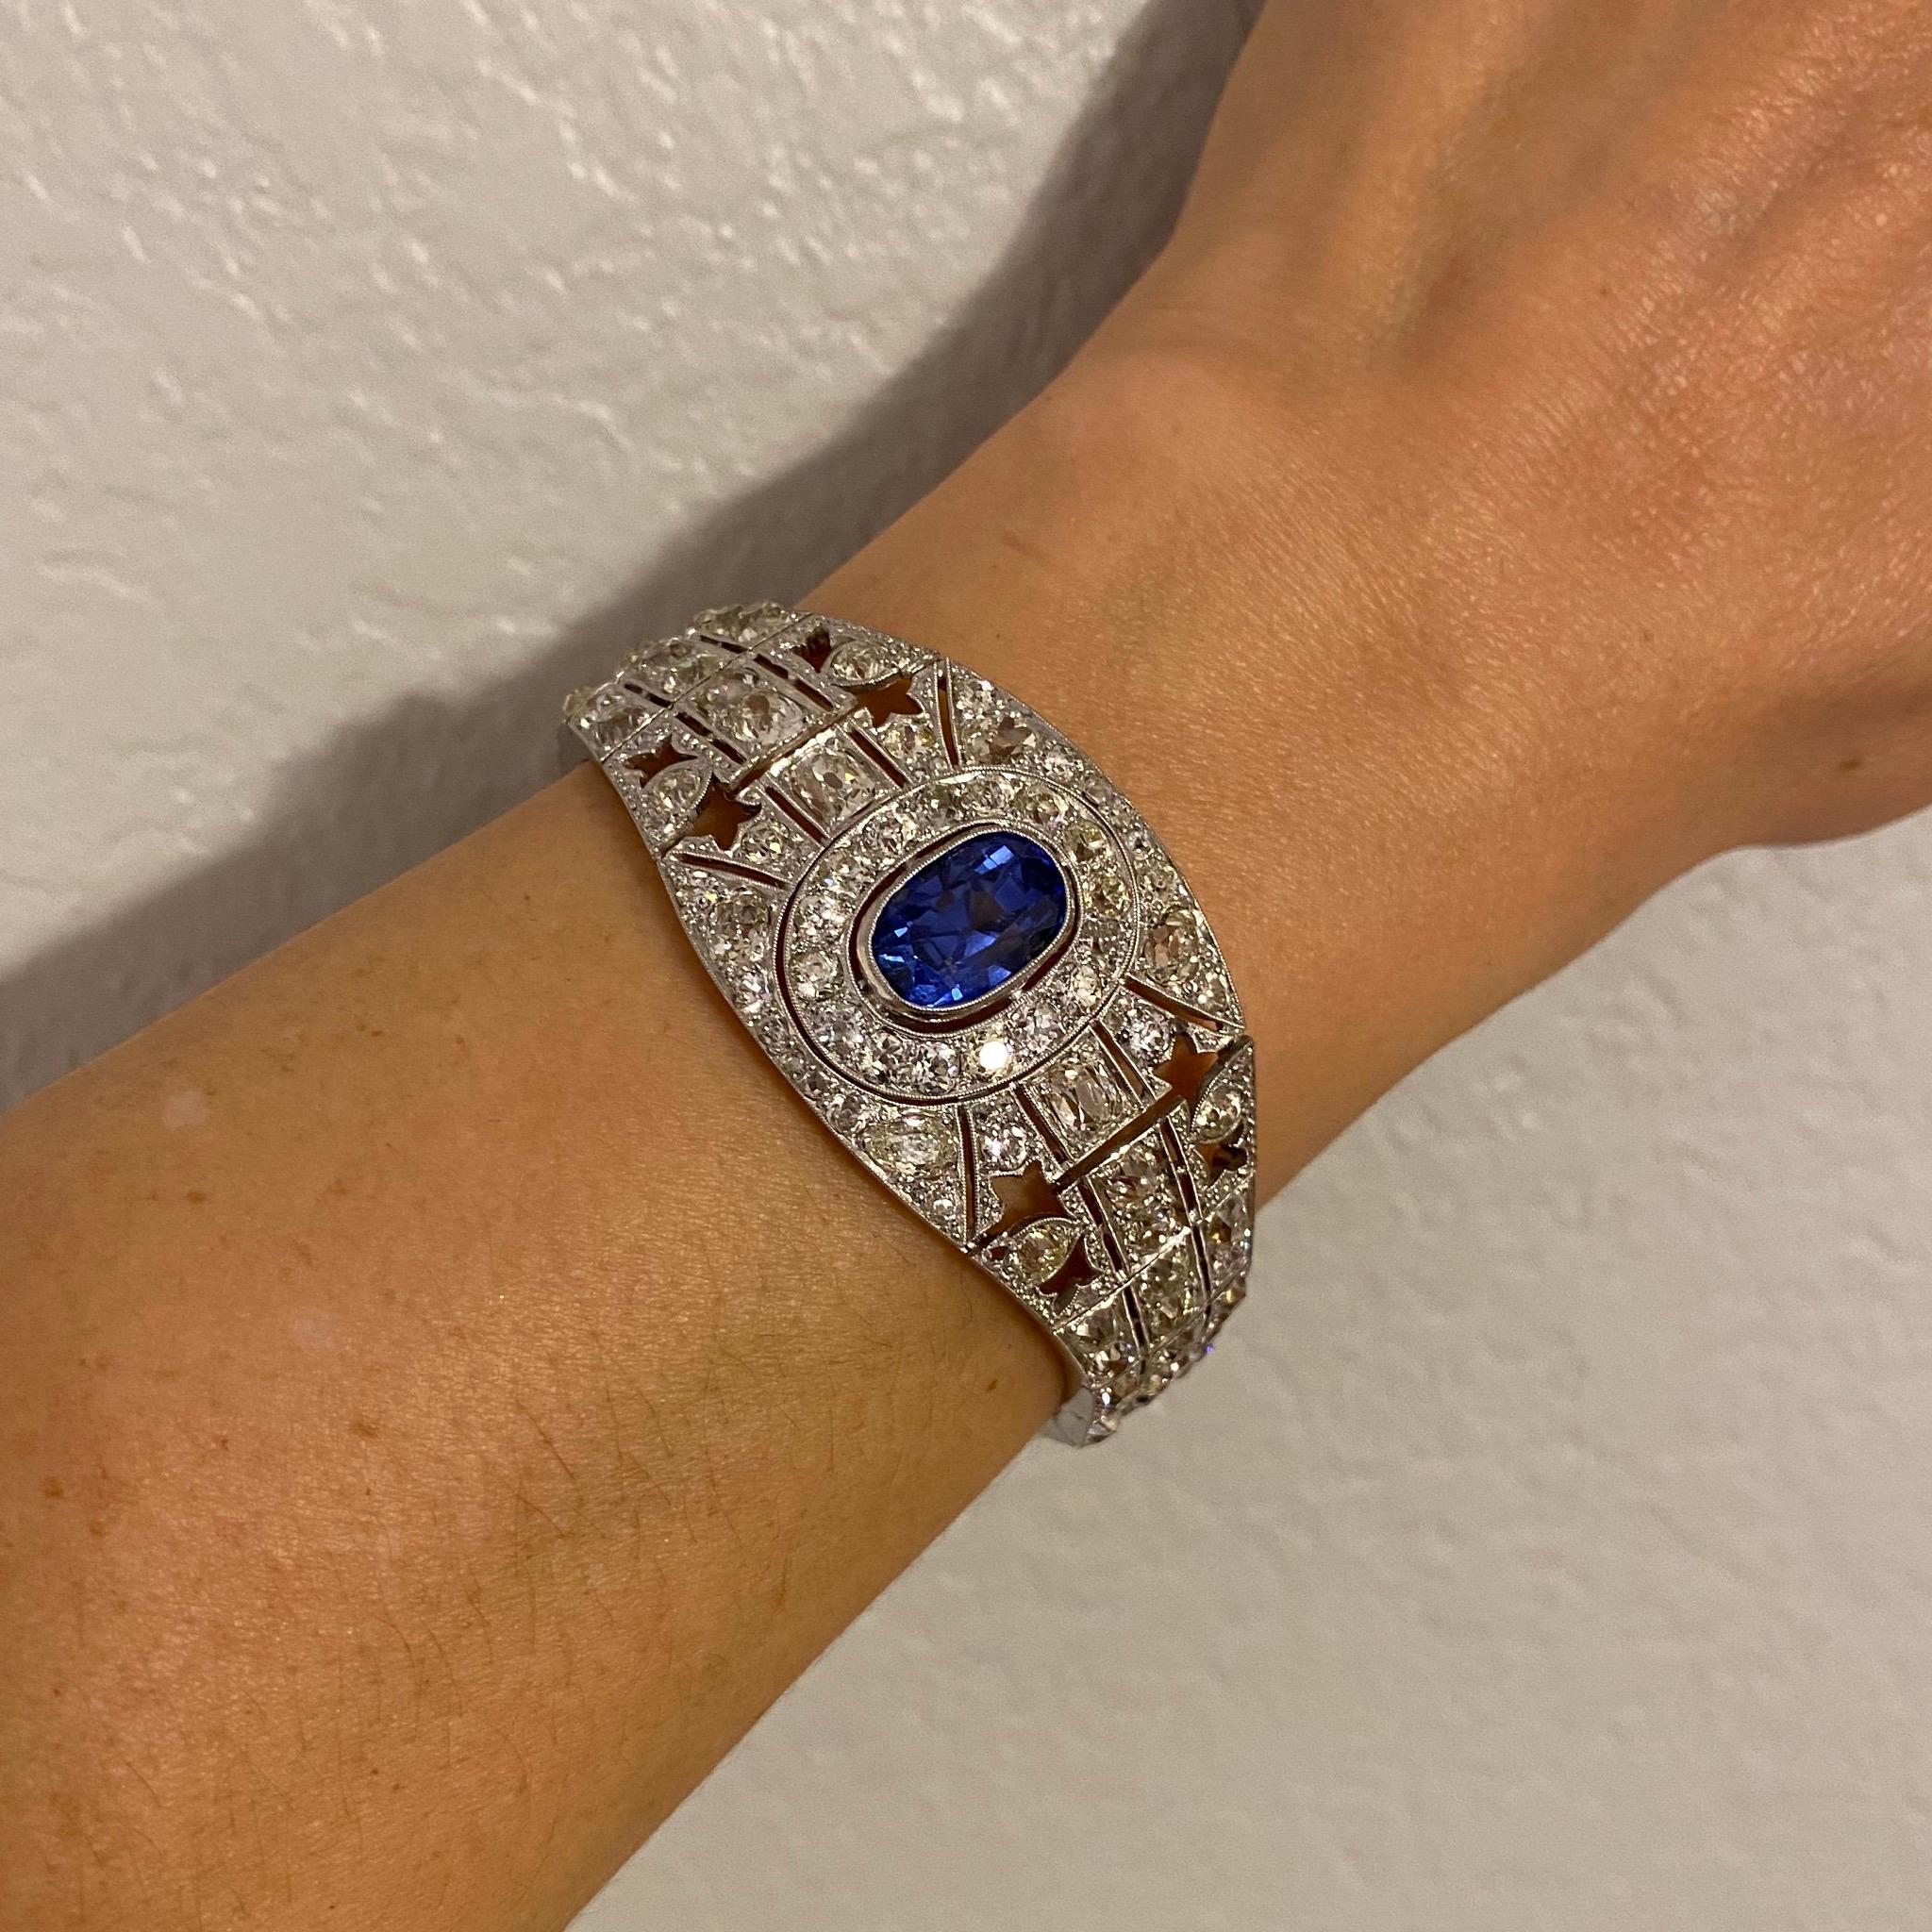 25 Carat Diamond and Sapphire Art Deco Platinum Bracelet Estate Fine Jewelry GIA
Simply Beautiful, Elegant and finely detailed Art Deco Diamond and Sapphire Platinum Bracelet. Hand crafted and set with Diamonds, weighing approx. 25.0 total Carat